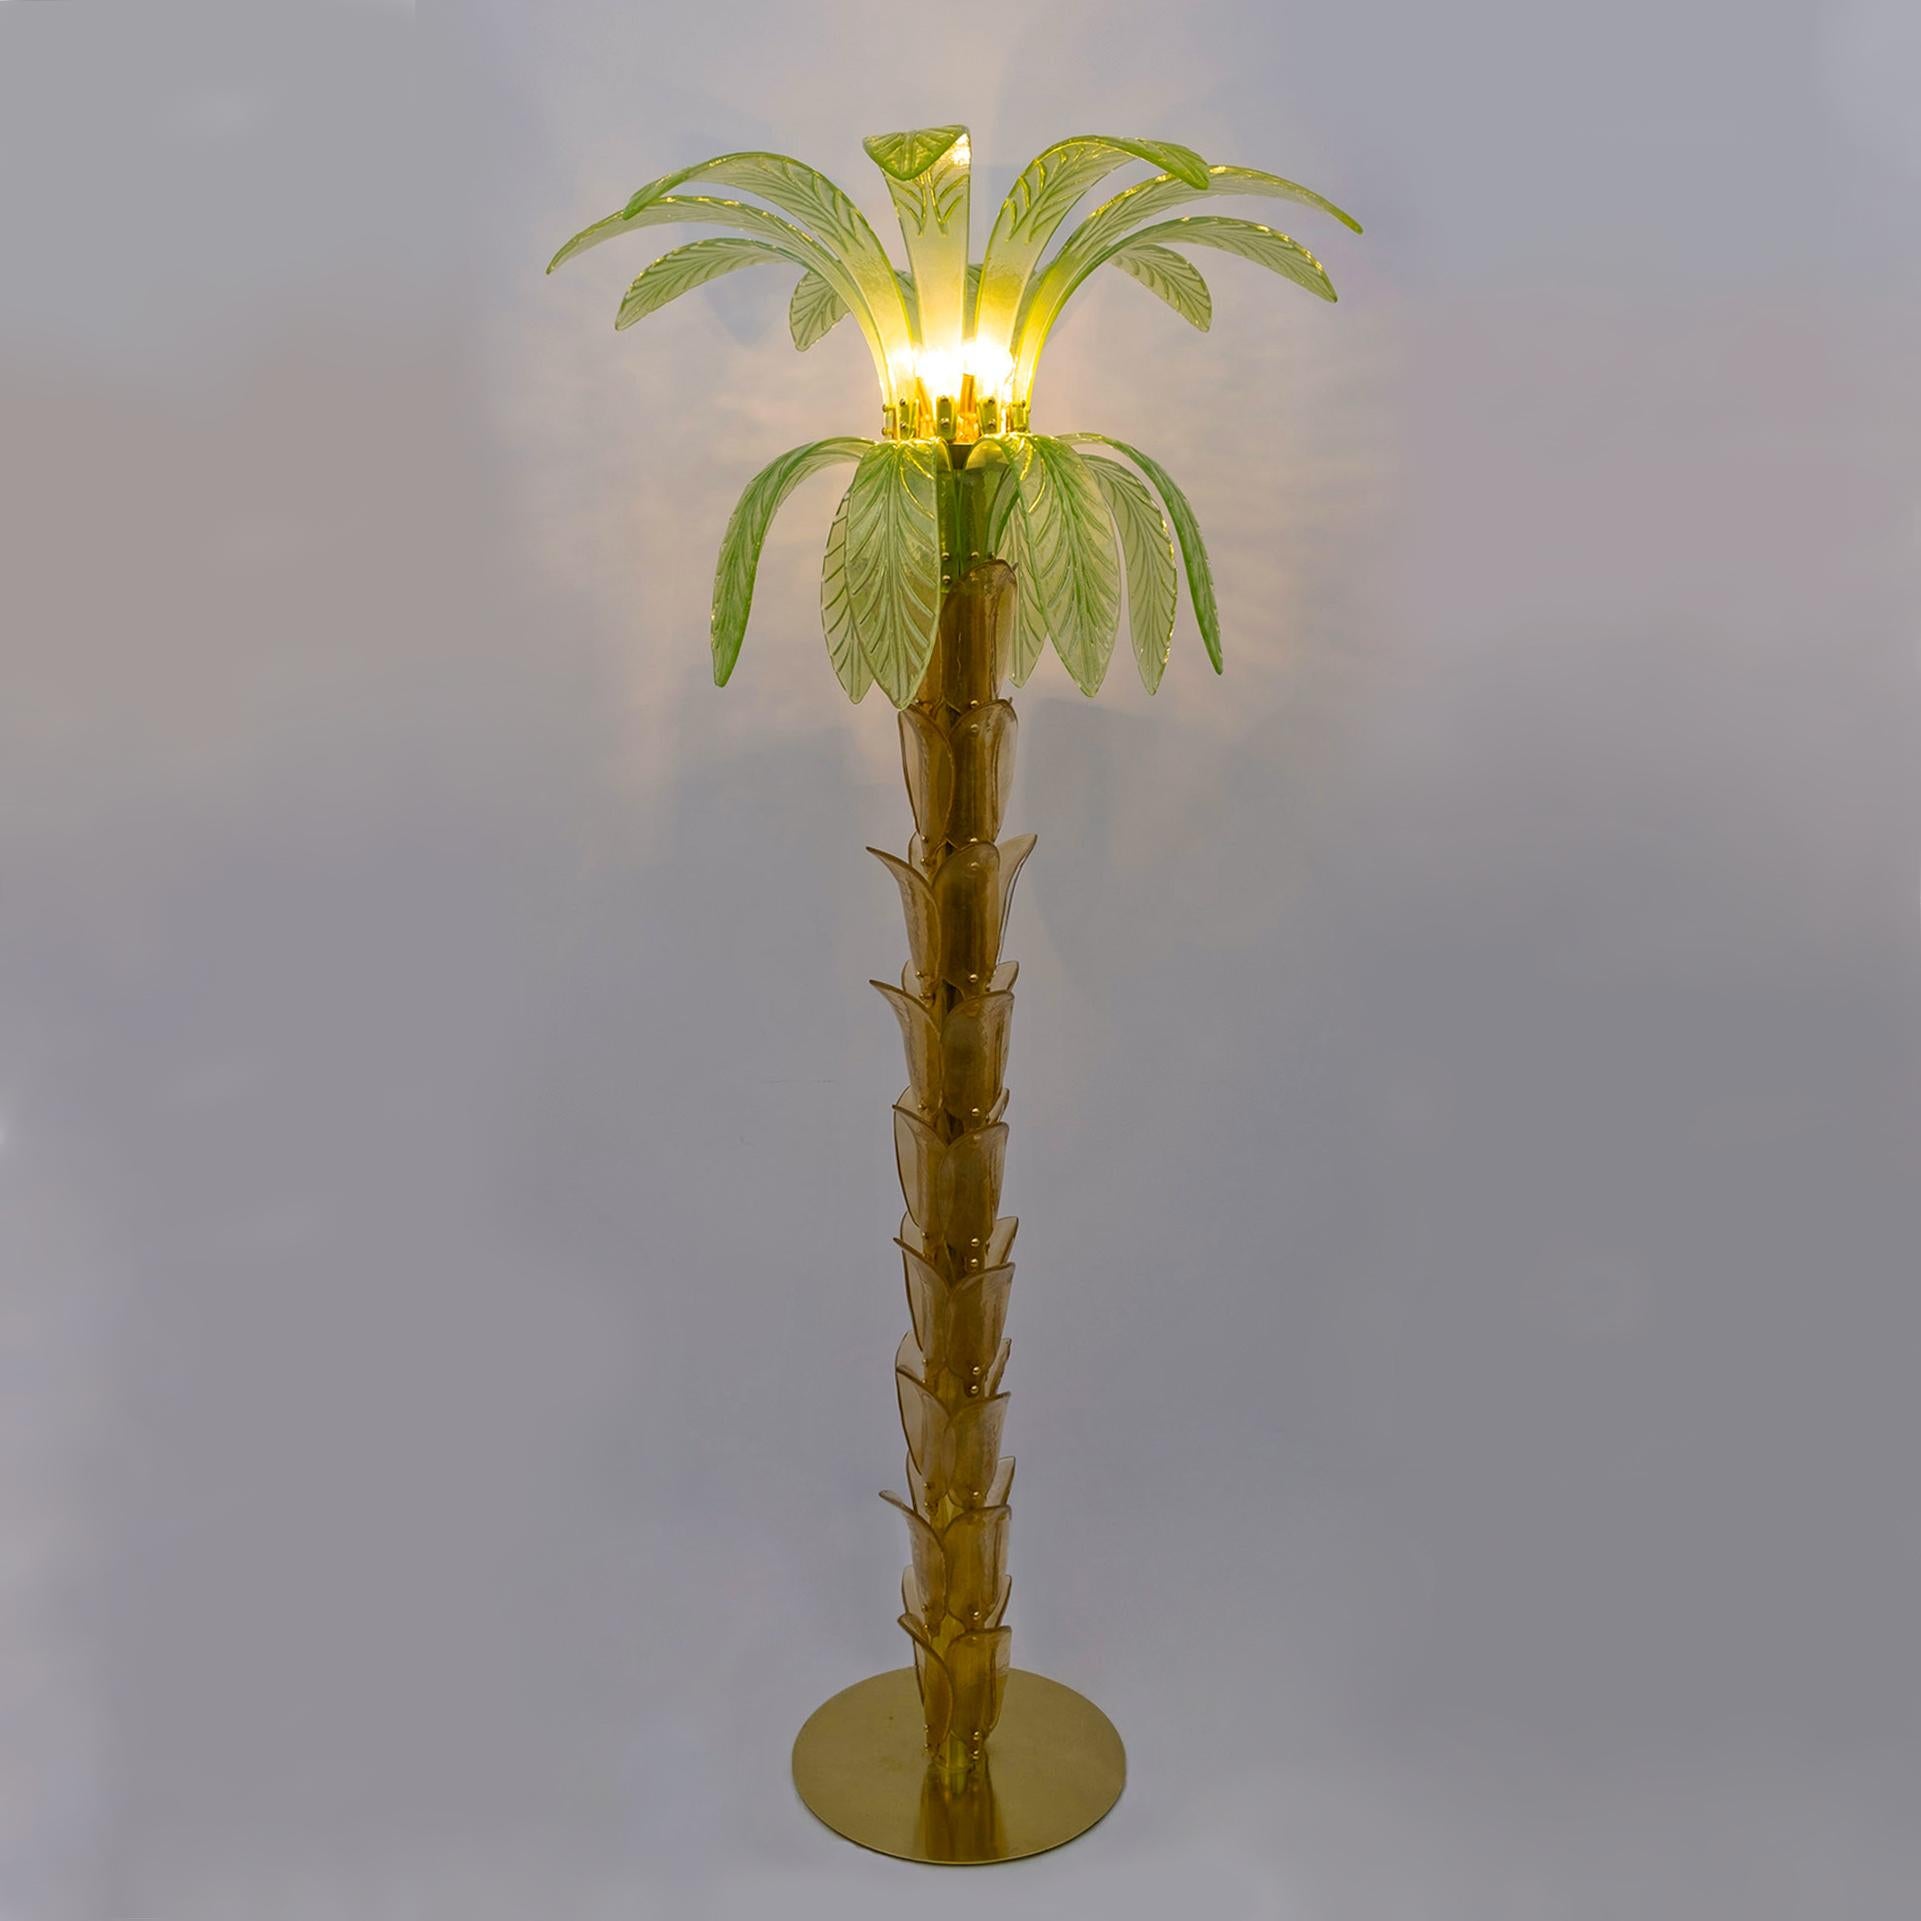 Mid-Century Modern Murano Glass and Brass Palm Tree Floor Lamps, 1970s For Sale